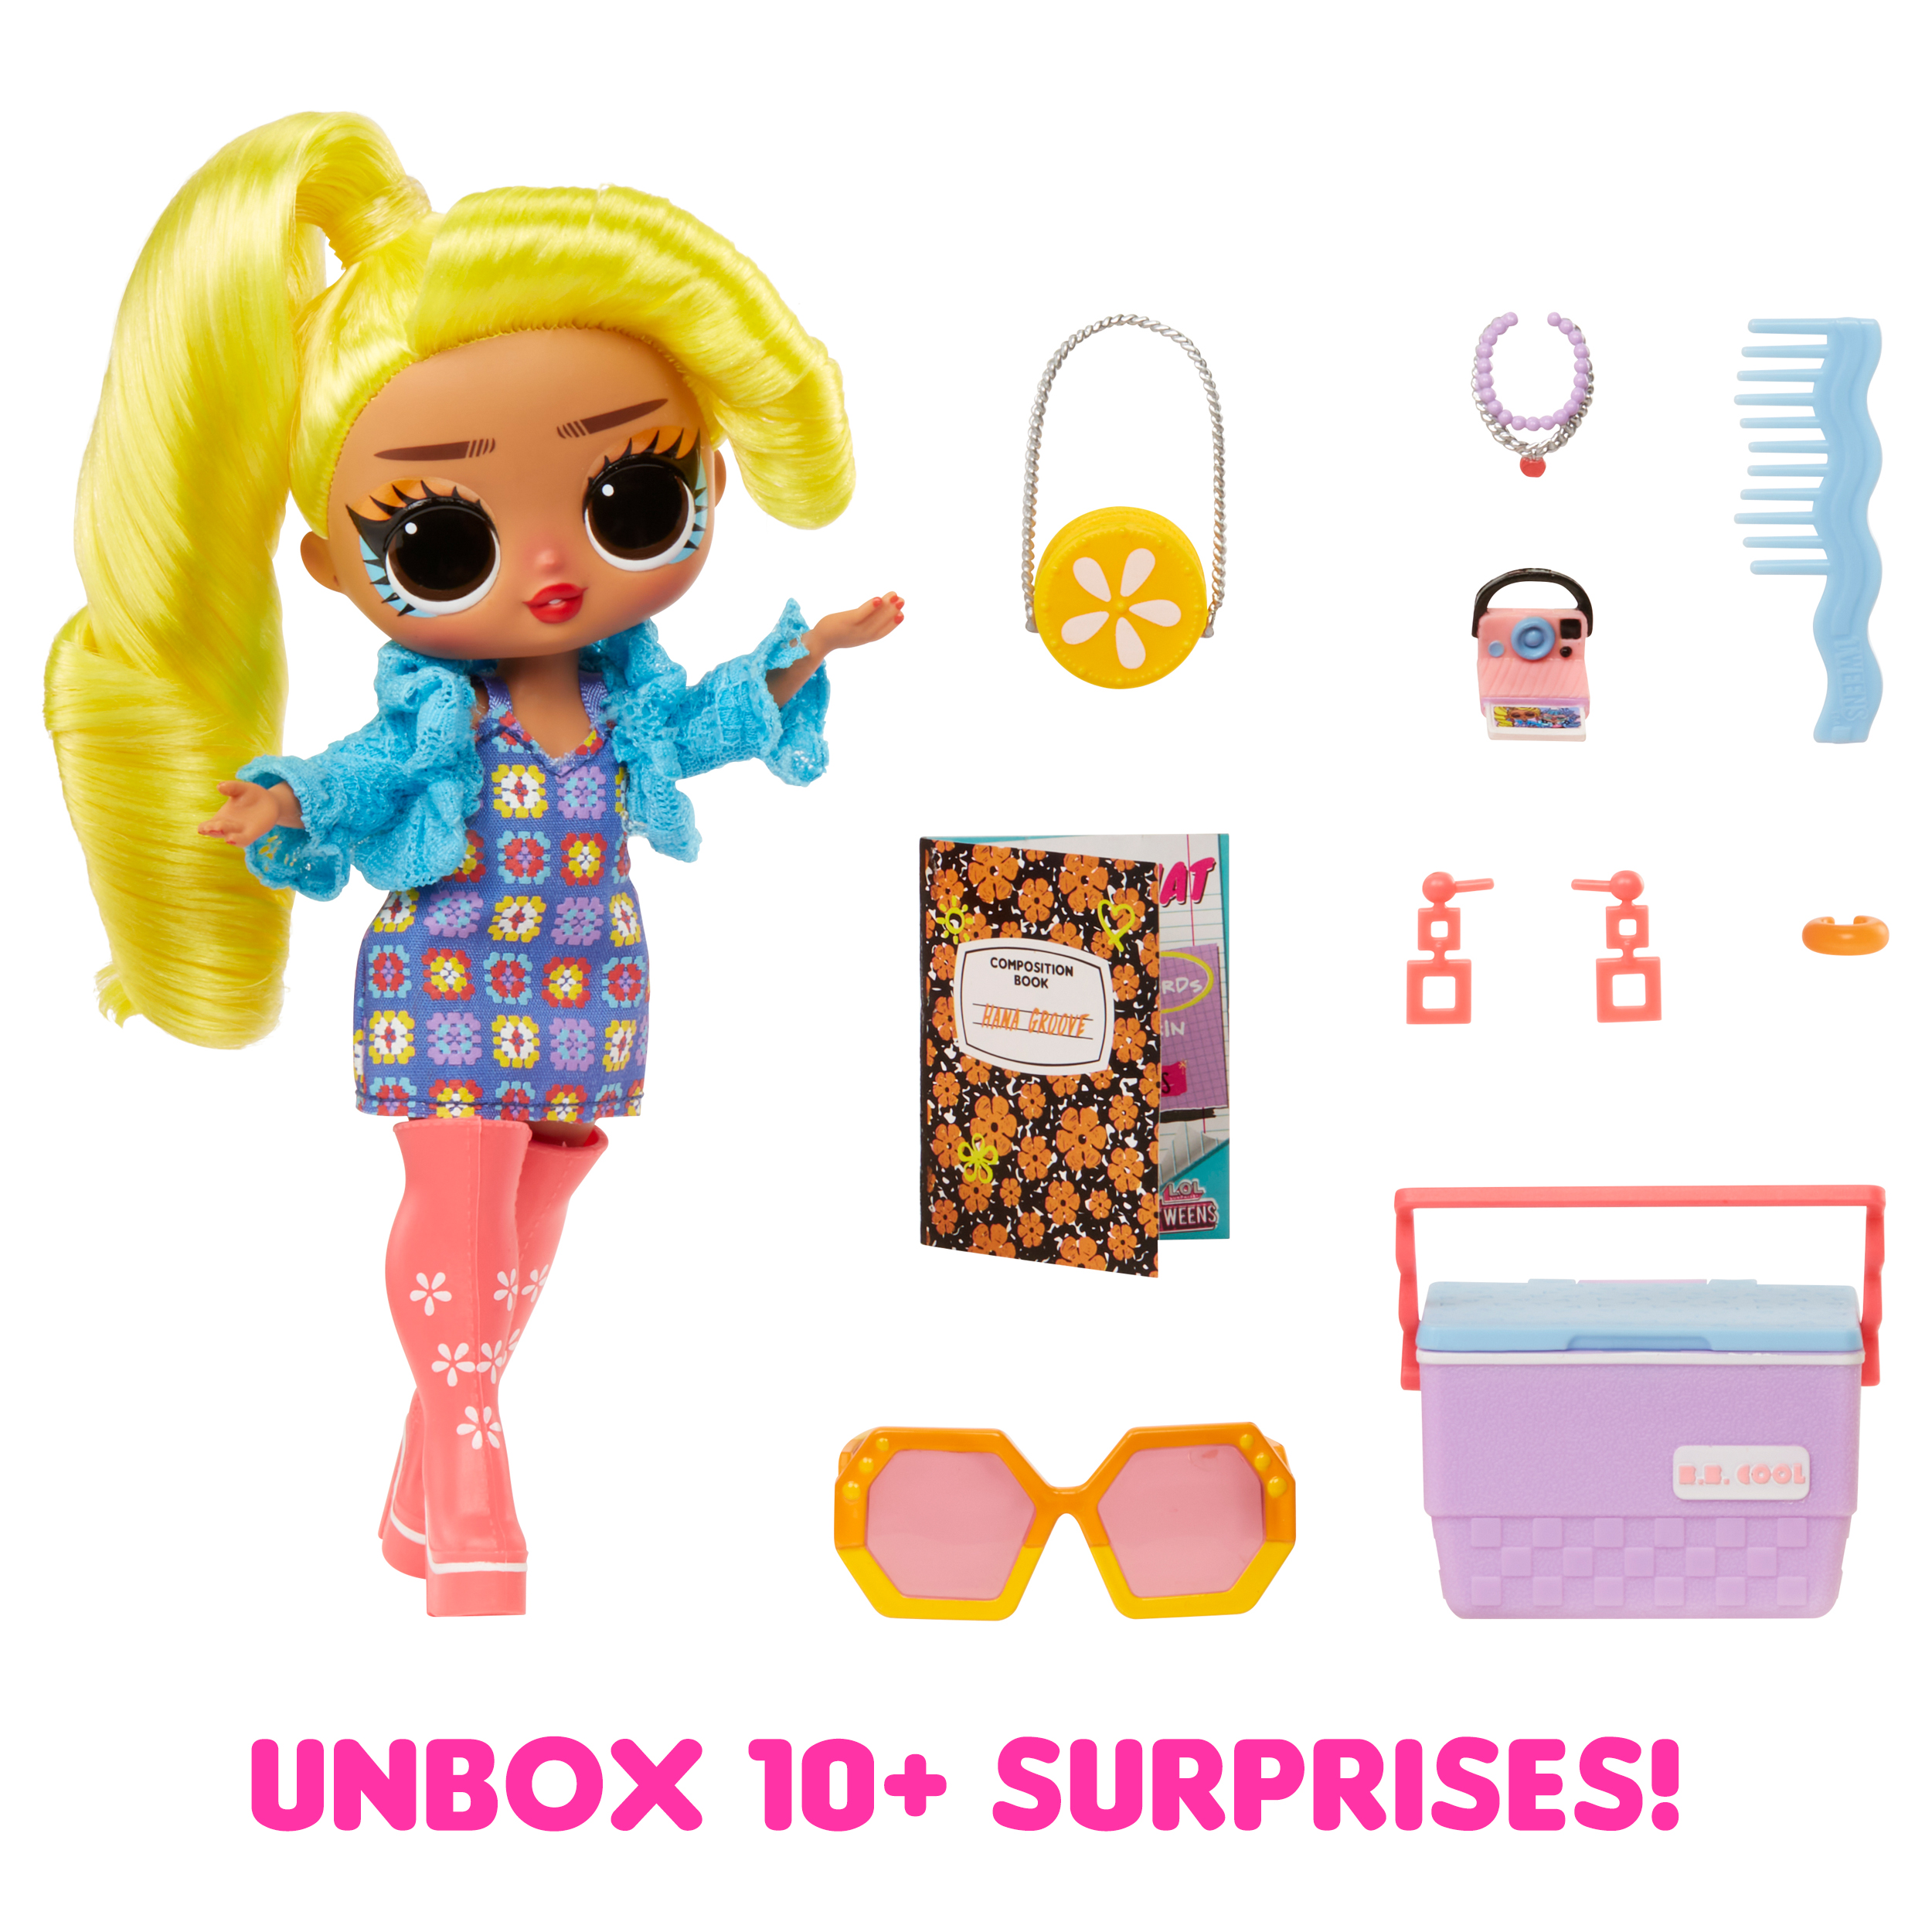 LOL Surprise Tweens Fashion Doll Hana Groove with 10+ Surprises, Great Gift for Kids Ages 4+ - image 3 of 7